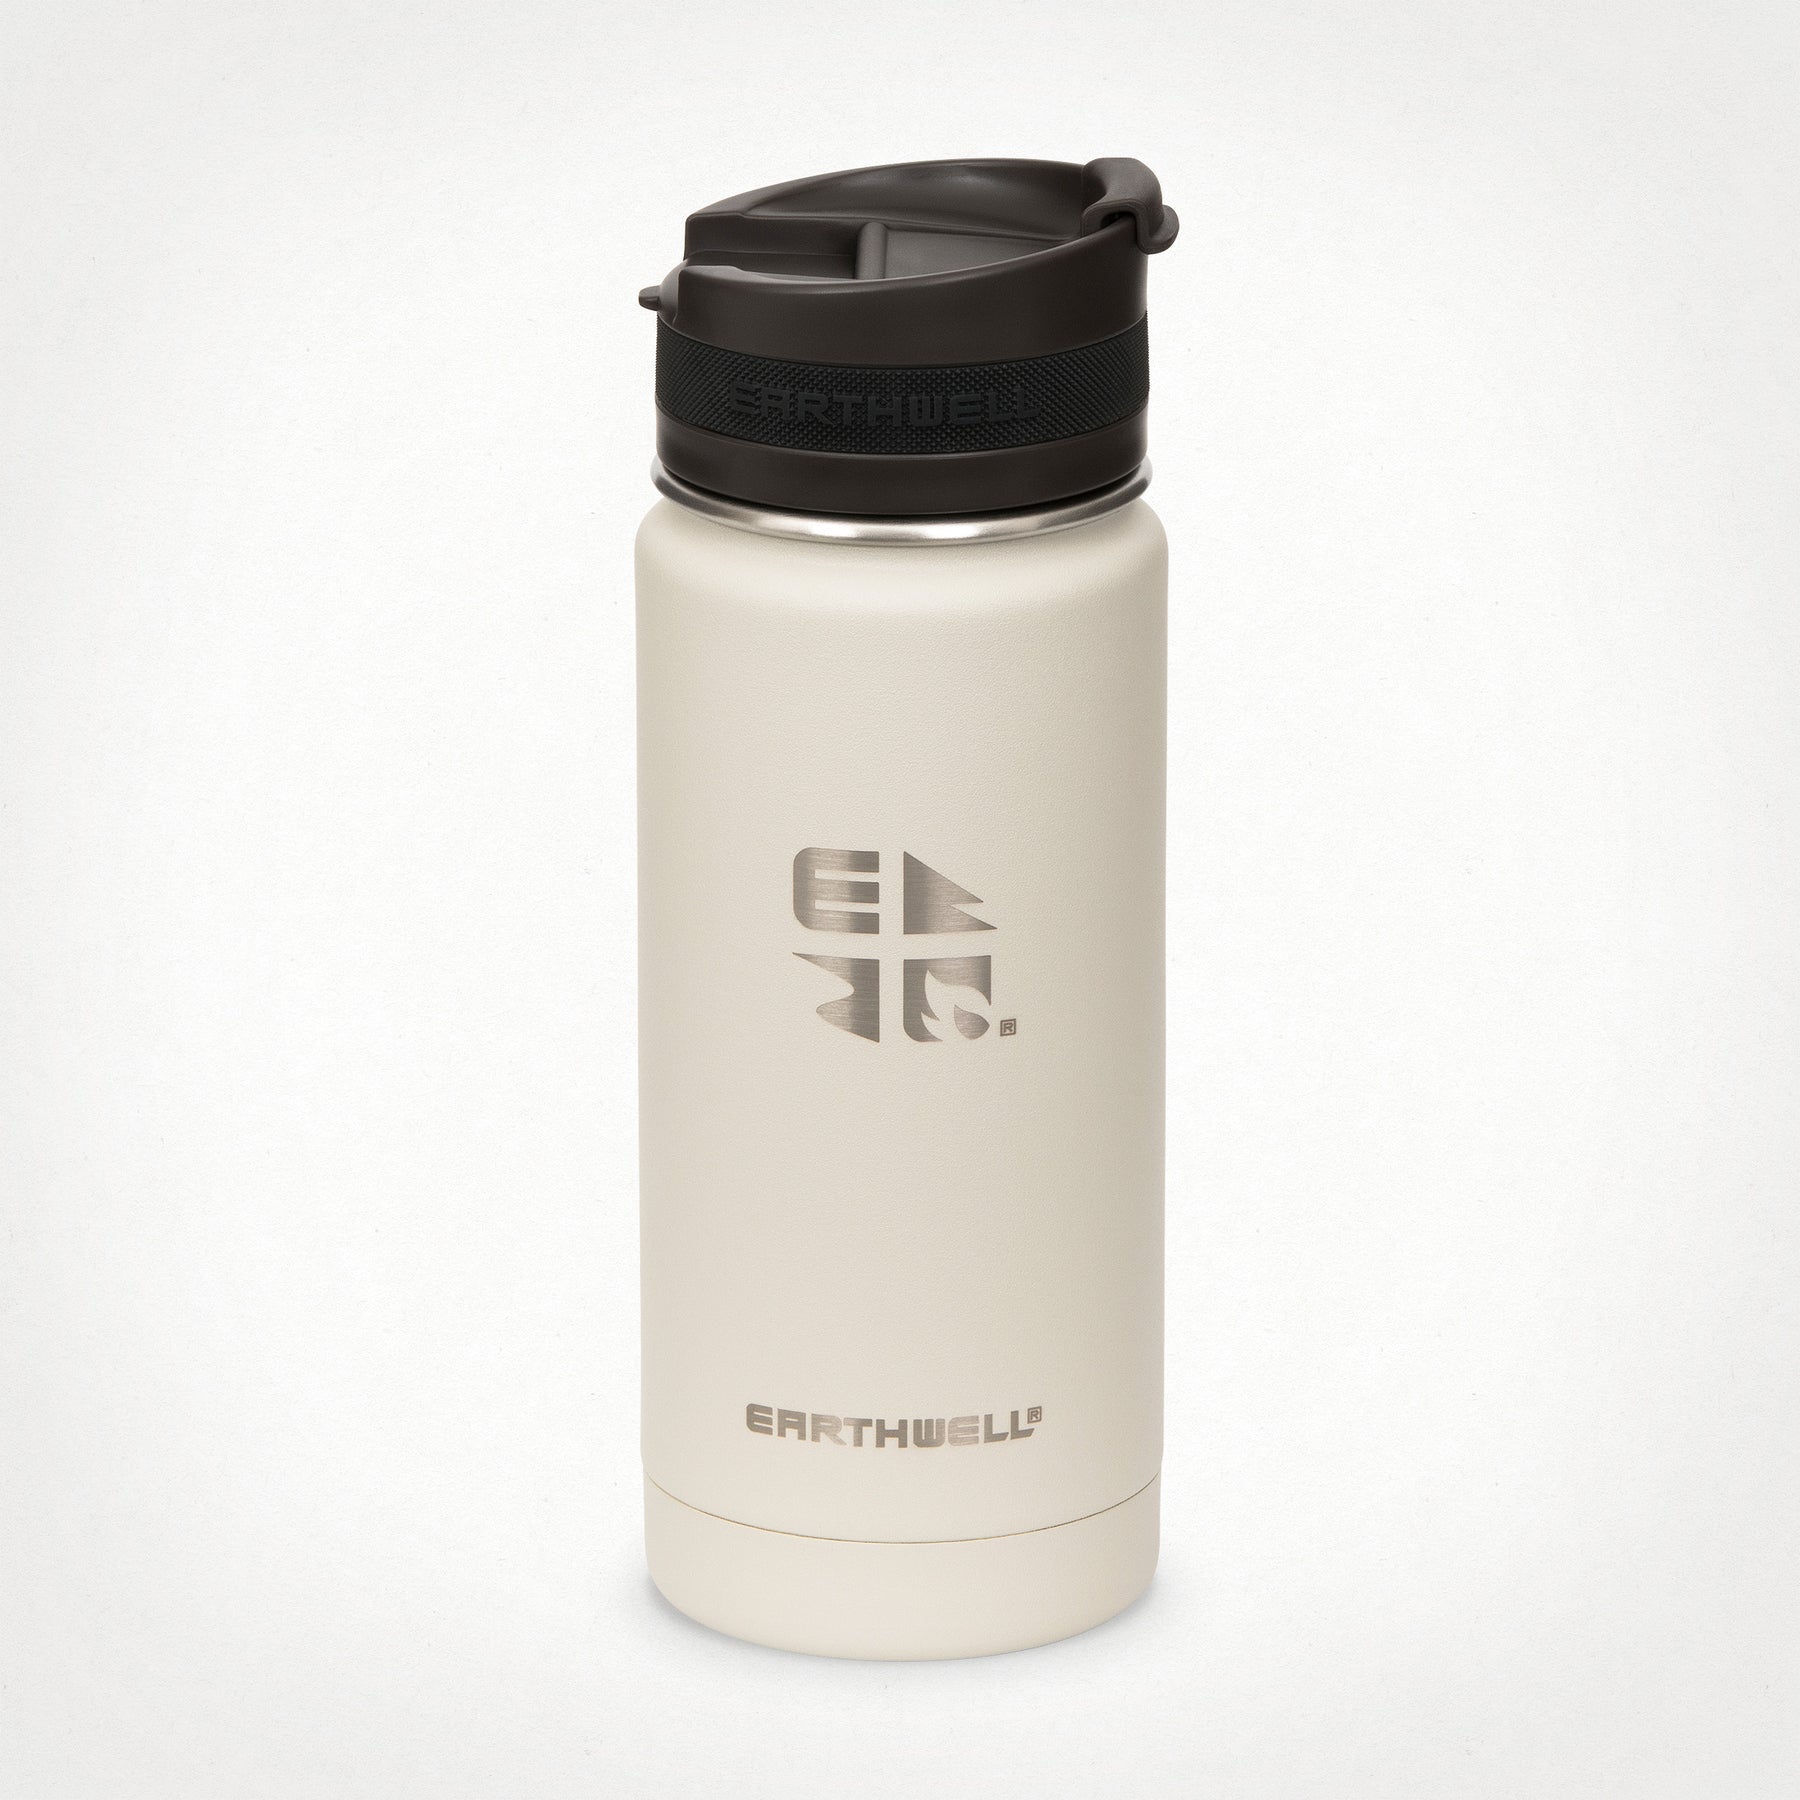 Custom 20 oz. Large Urban Thermos Containers